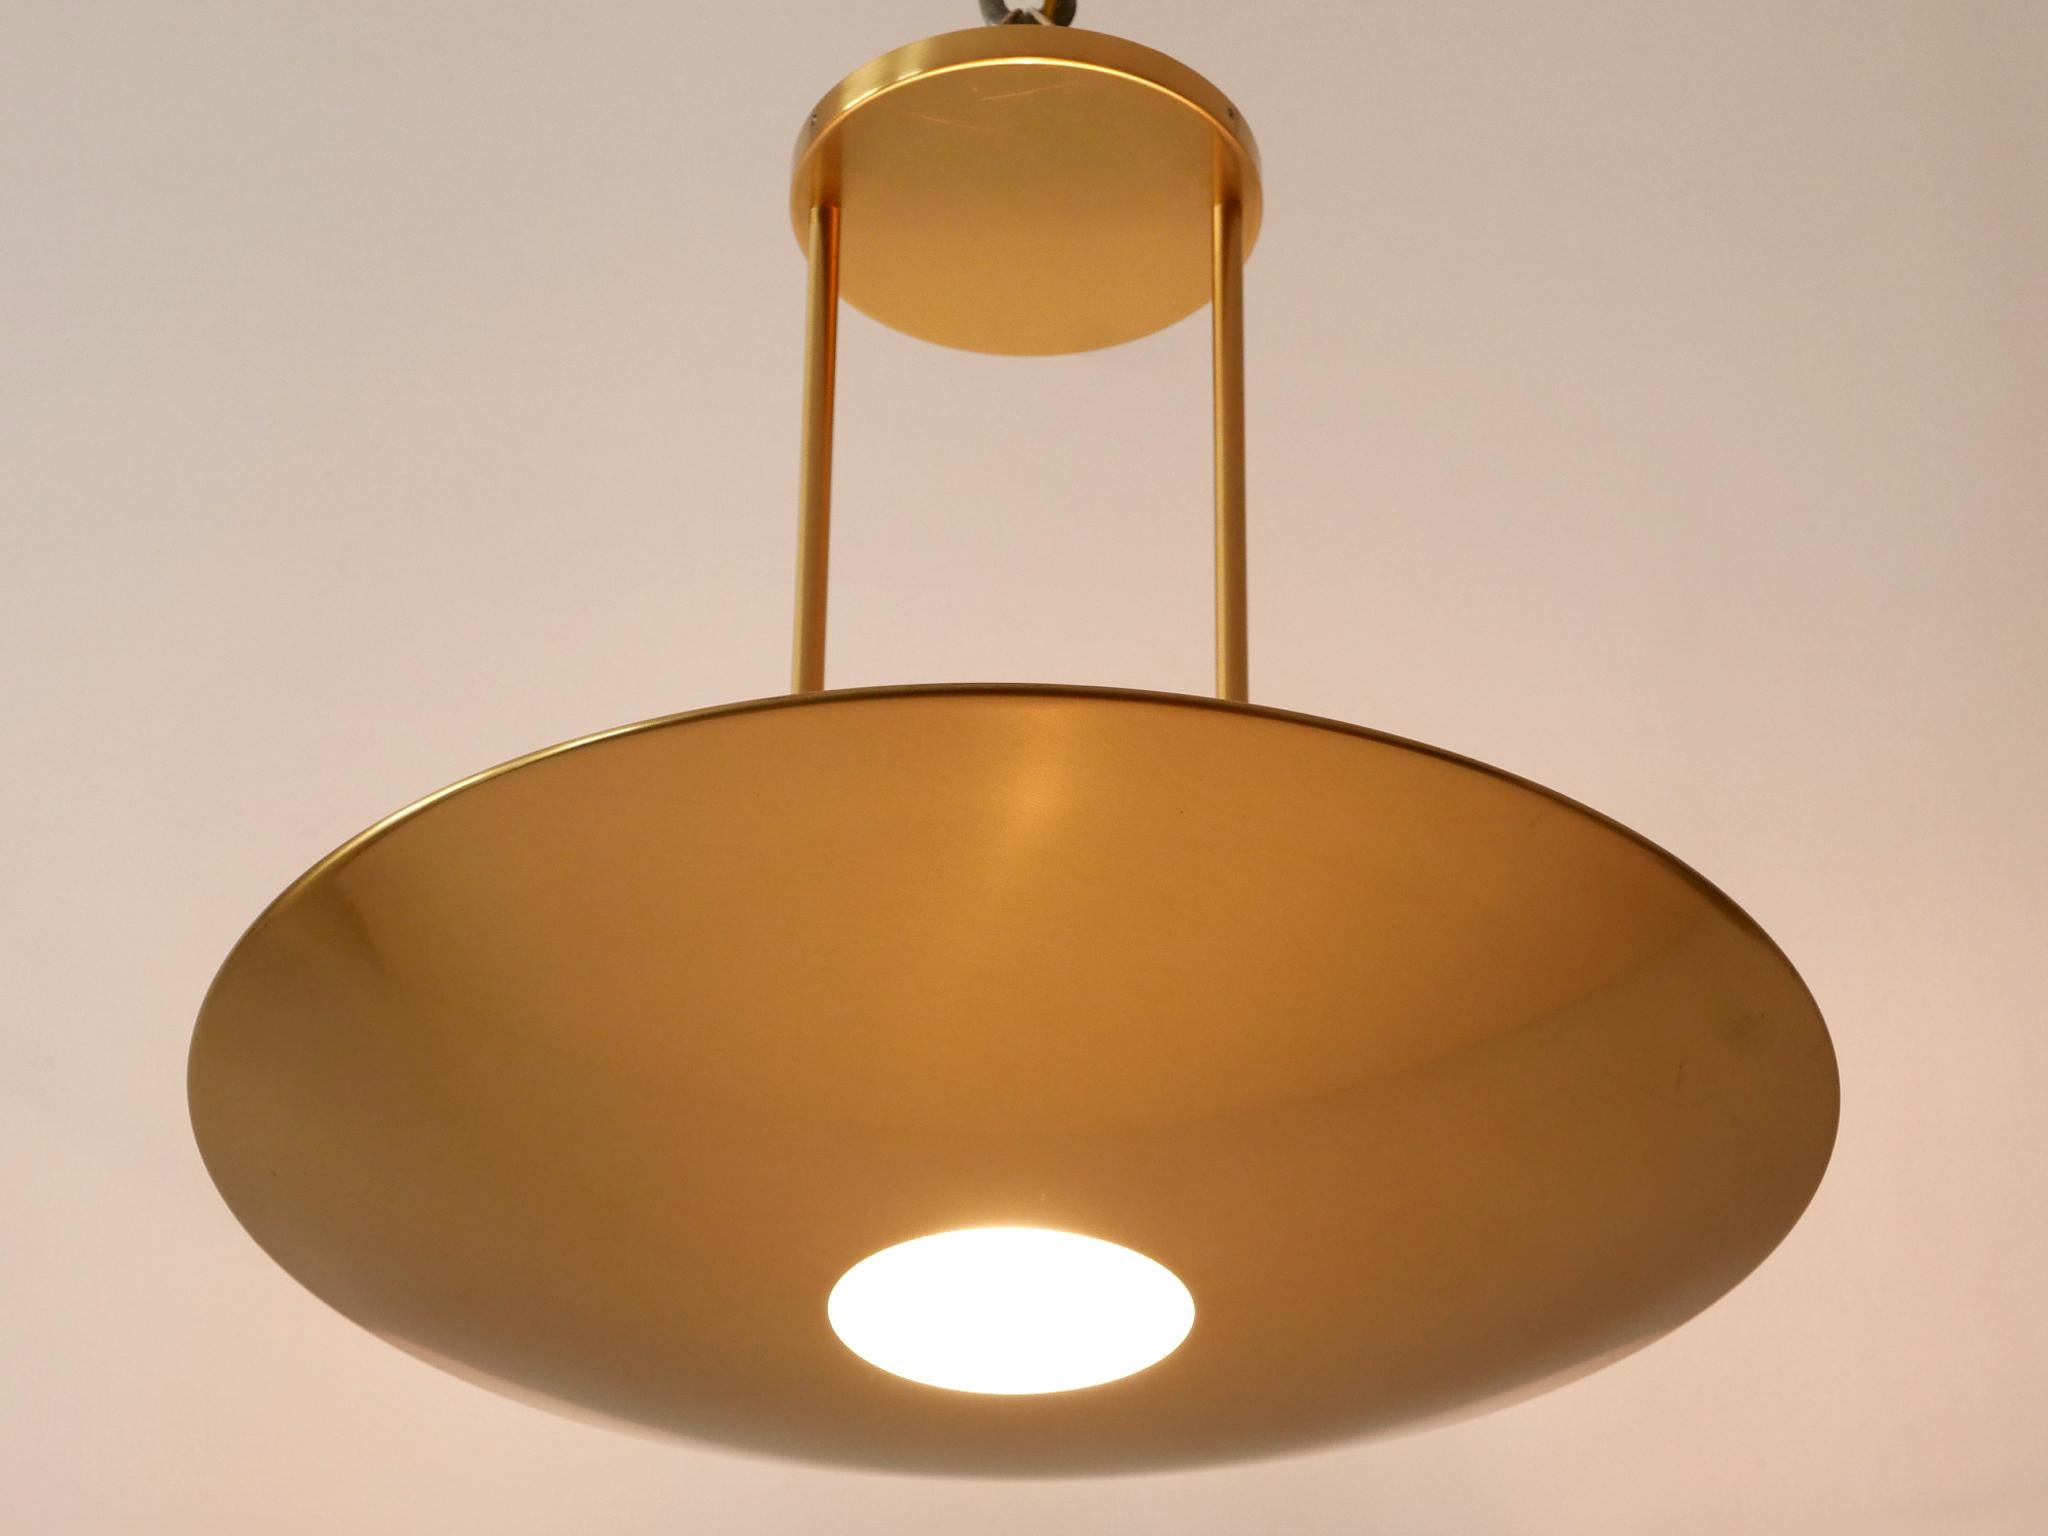 Polished Modernist Brass Pendant Lamp or Ceiling Fixture by Florian Schulz Germany 1980s